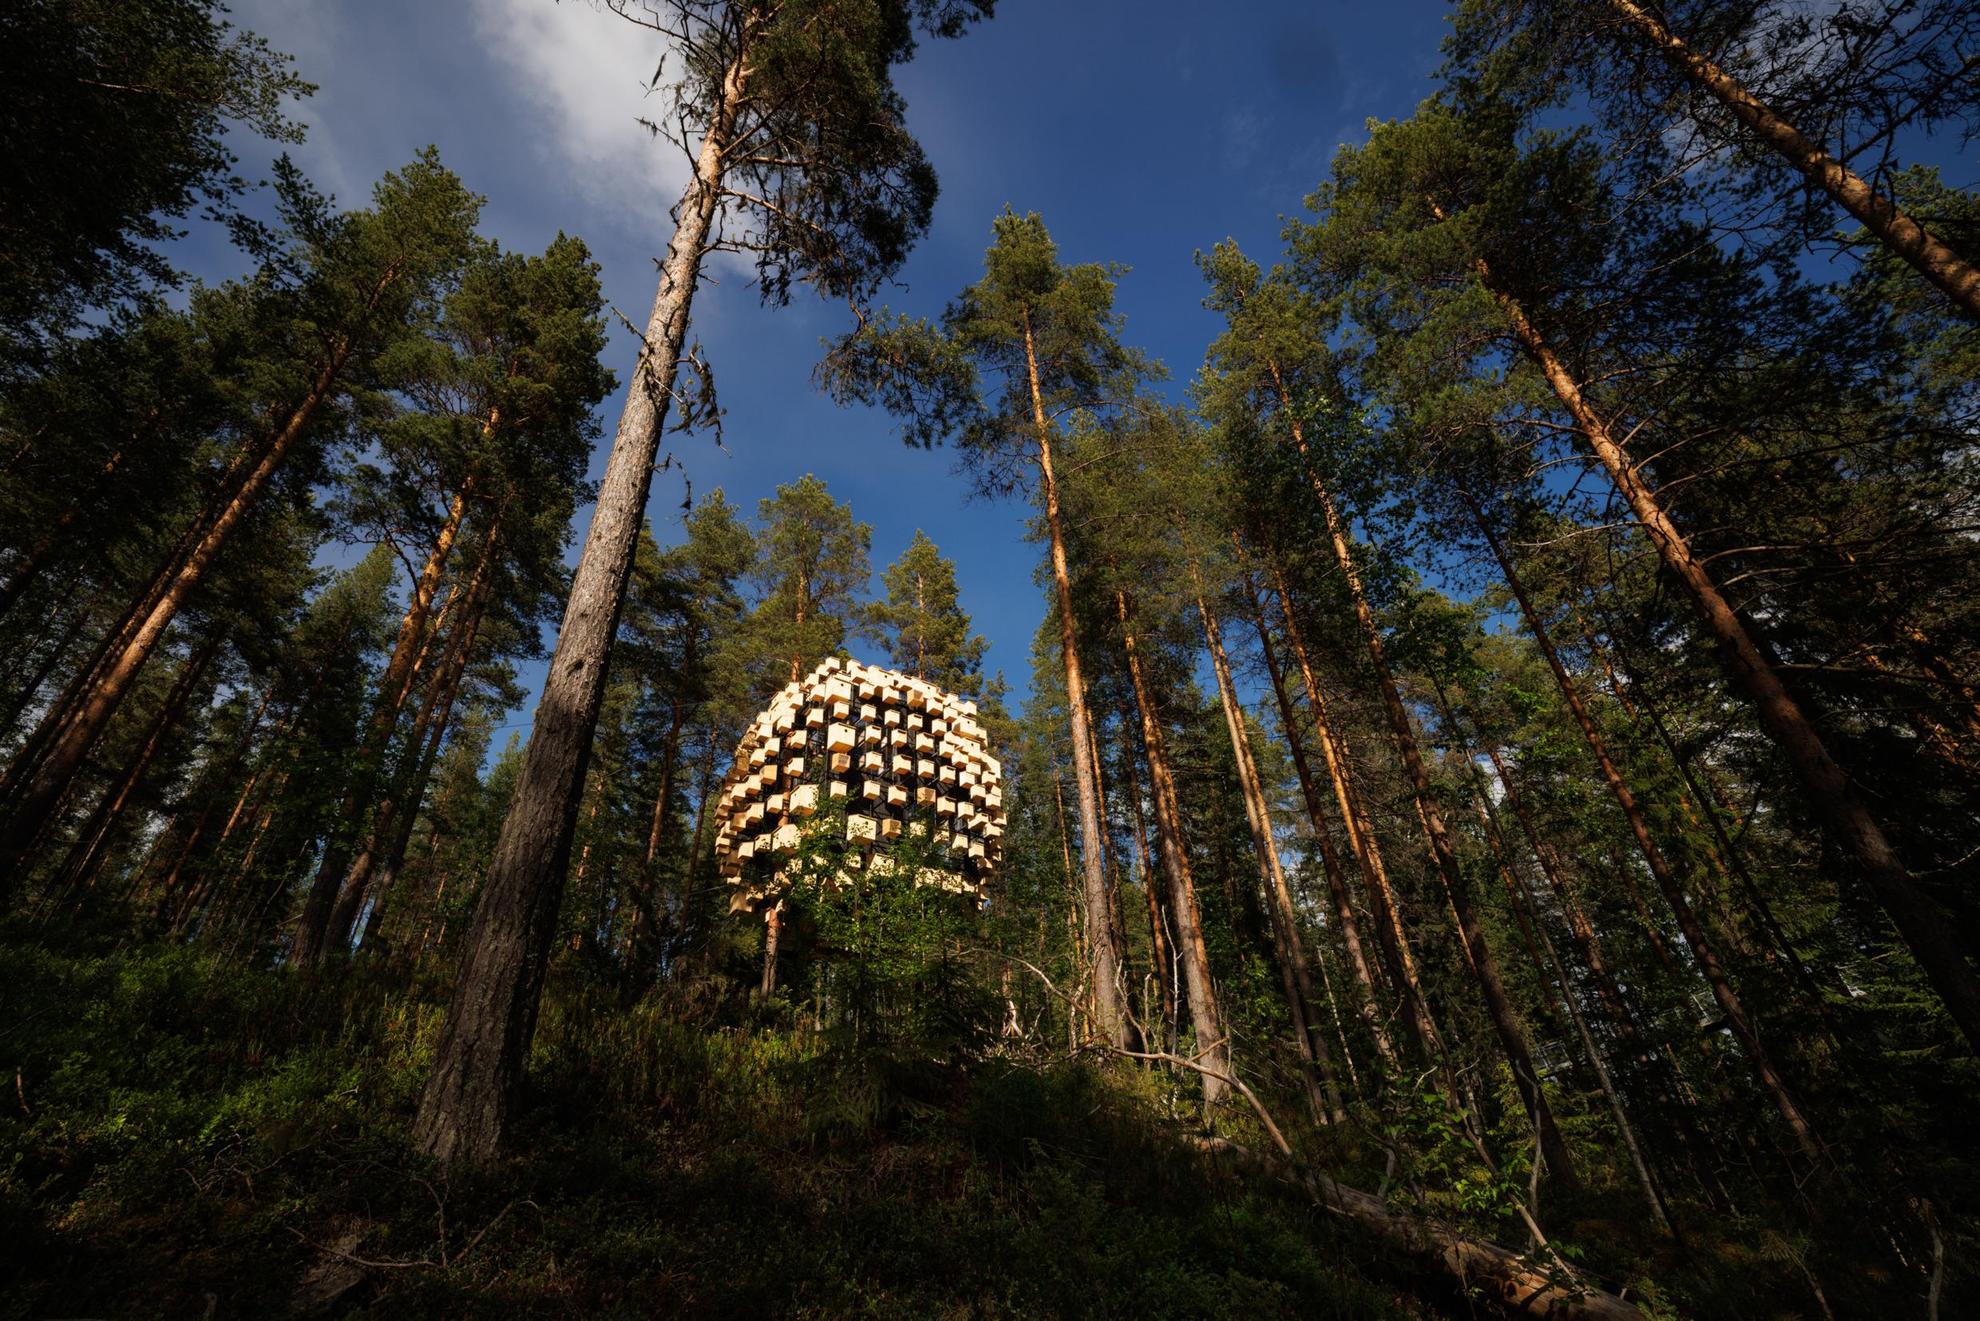 A tree house in the forest. Several bird boxes decorates the outside of the house.